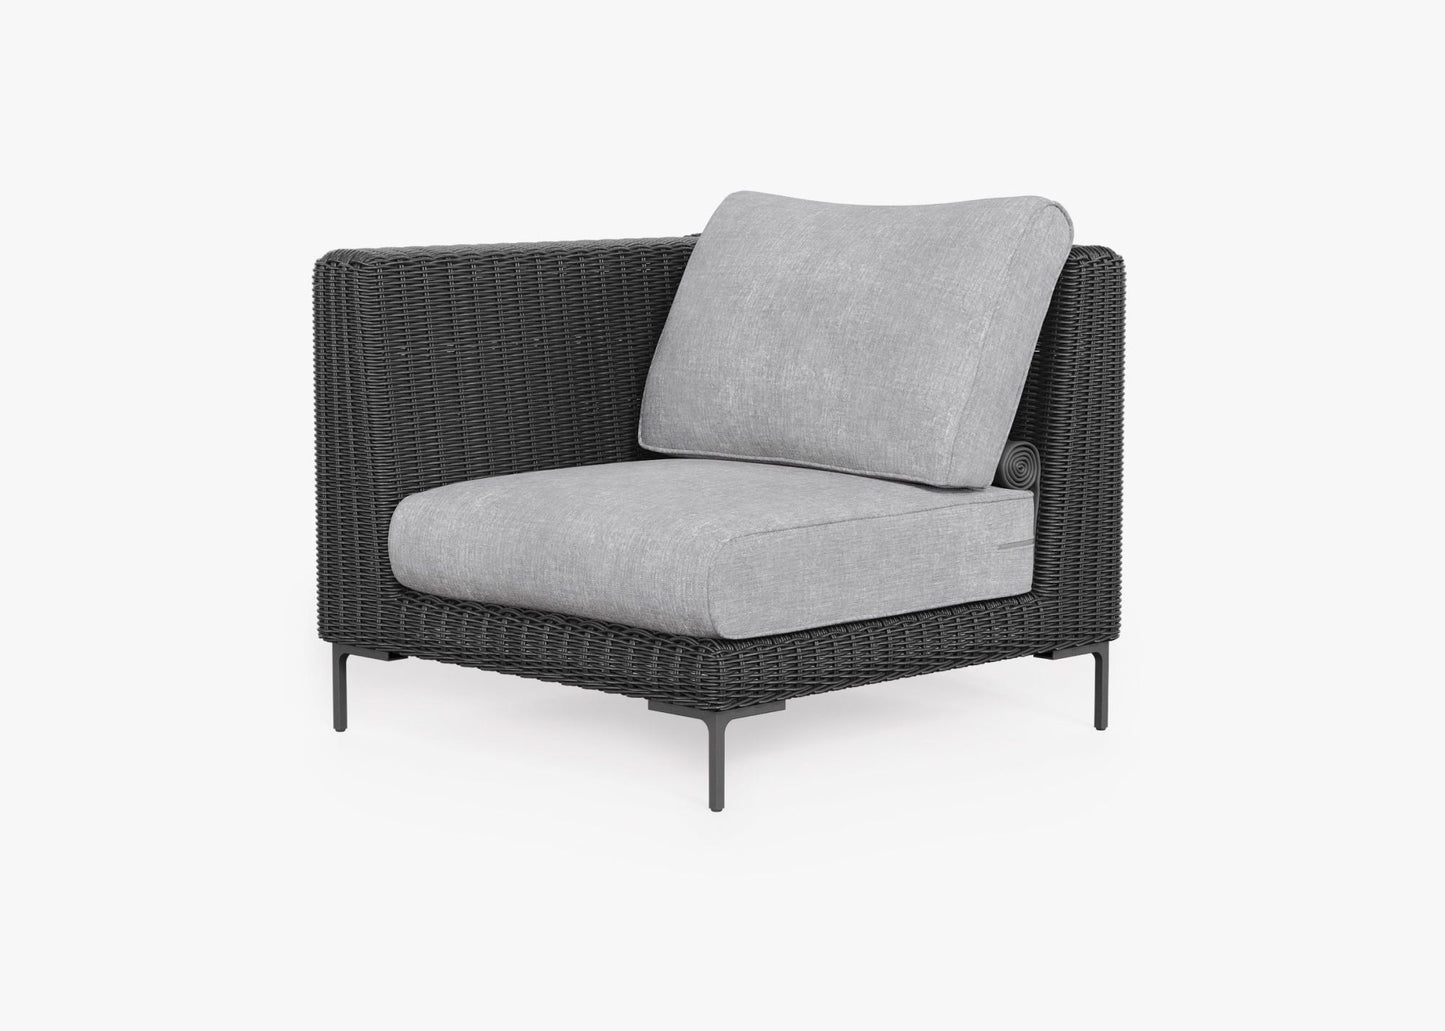 Live Outer 37" Black Wicker Outdoor Left/Right Corner Chair With Pacific Fog Gray Cushion